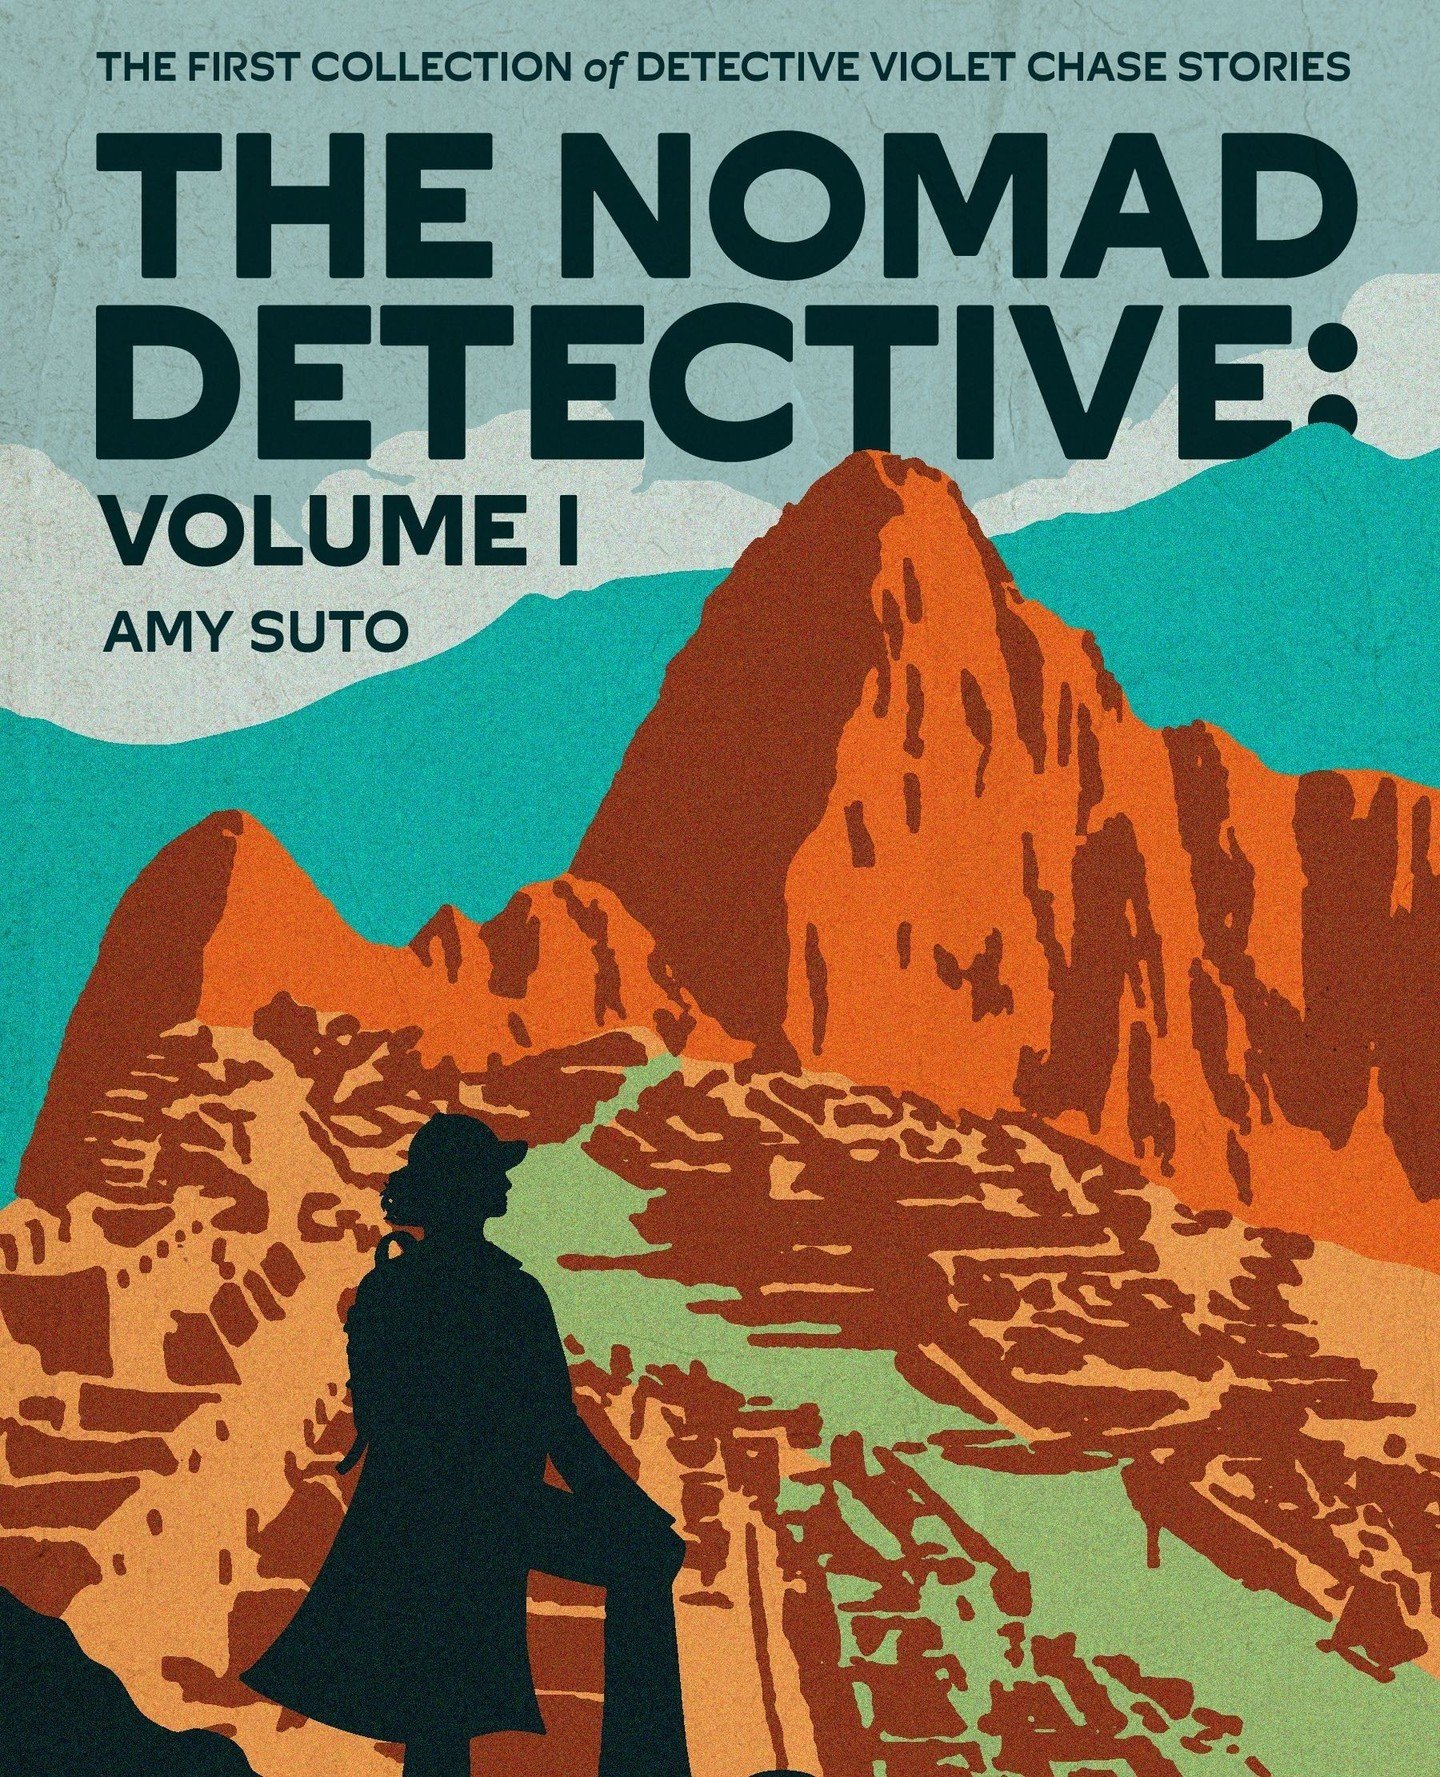 ‼️ Screaming crying throwing up because THE NOMAD DETECTIVE: VOLUME I is now available on Amazon pre-order!!! Link is in my bio 👀⁠
⁠
If you love...⁠
⁠
🕵️ Renegade Private Eyes⁠
💕 Rivals-to-lovers storylines⁠
📚 Short stories following mysteries fr